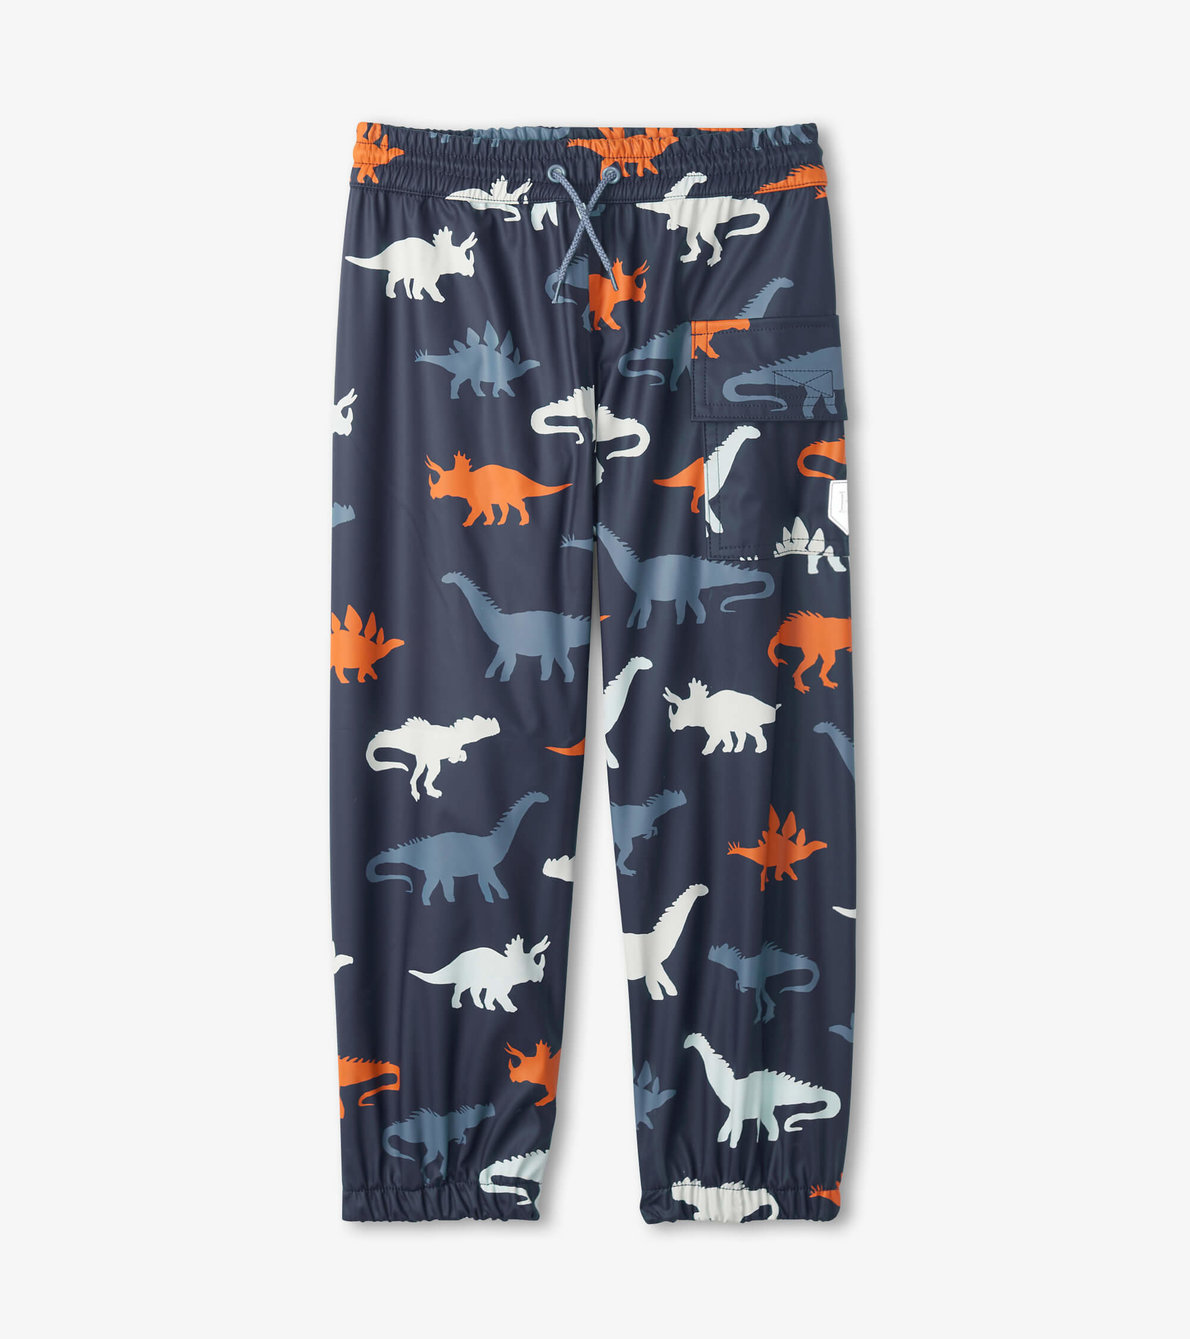 View larger image of Dinosaur Silhouettes Colour Changing Kids Rain Pants